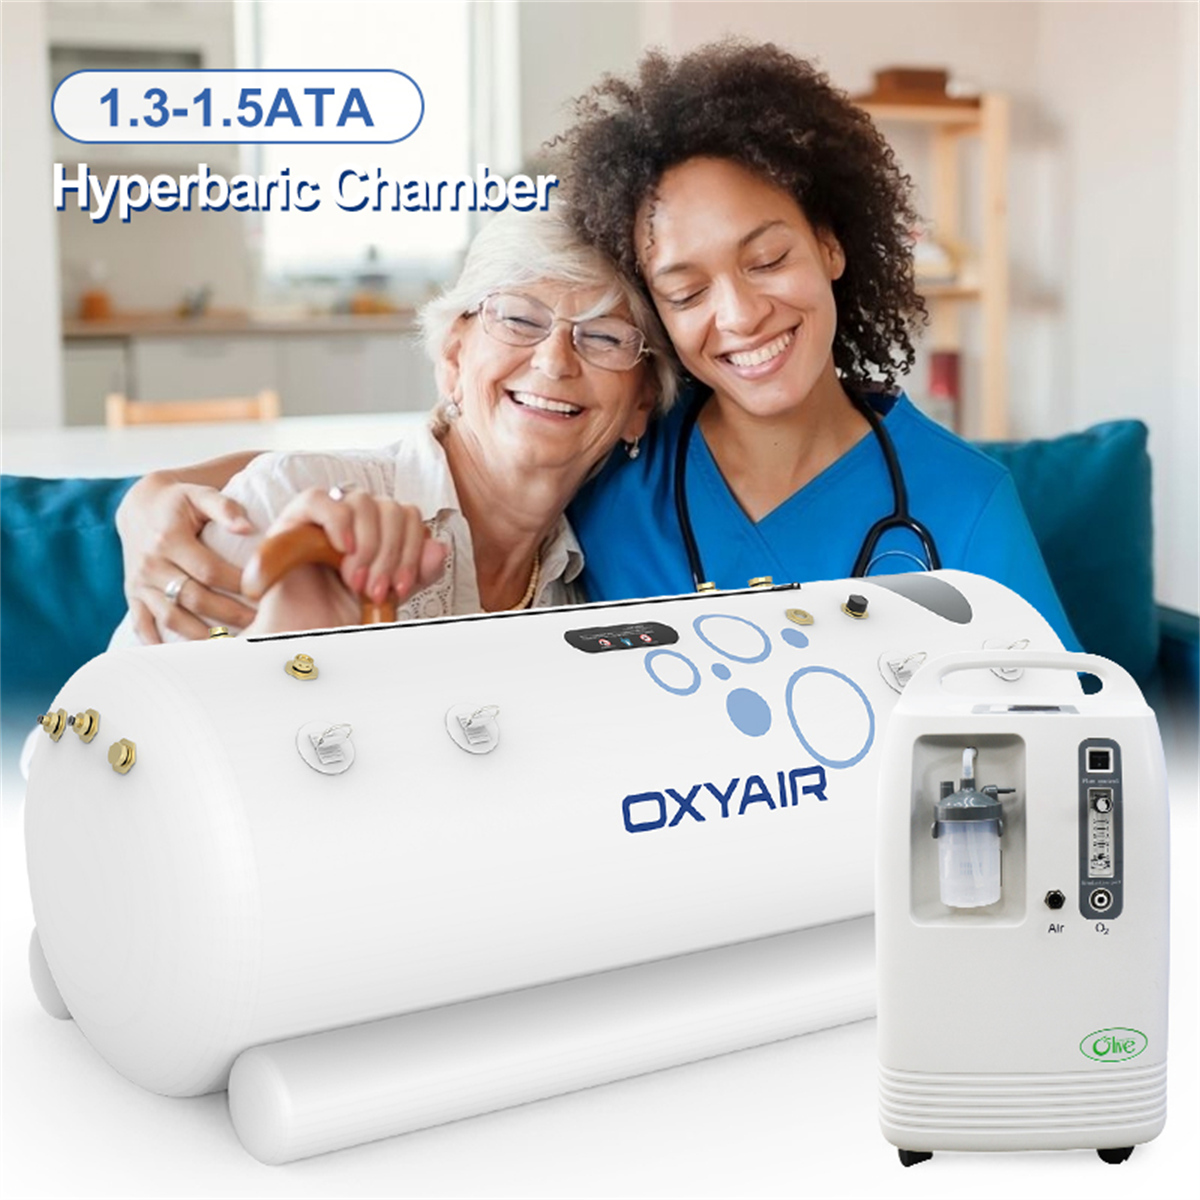 Hyperbaric Chamber for Dementia Patients